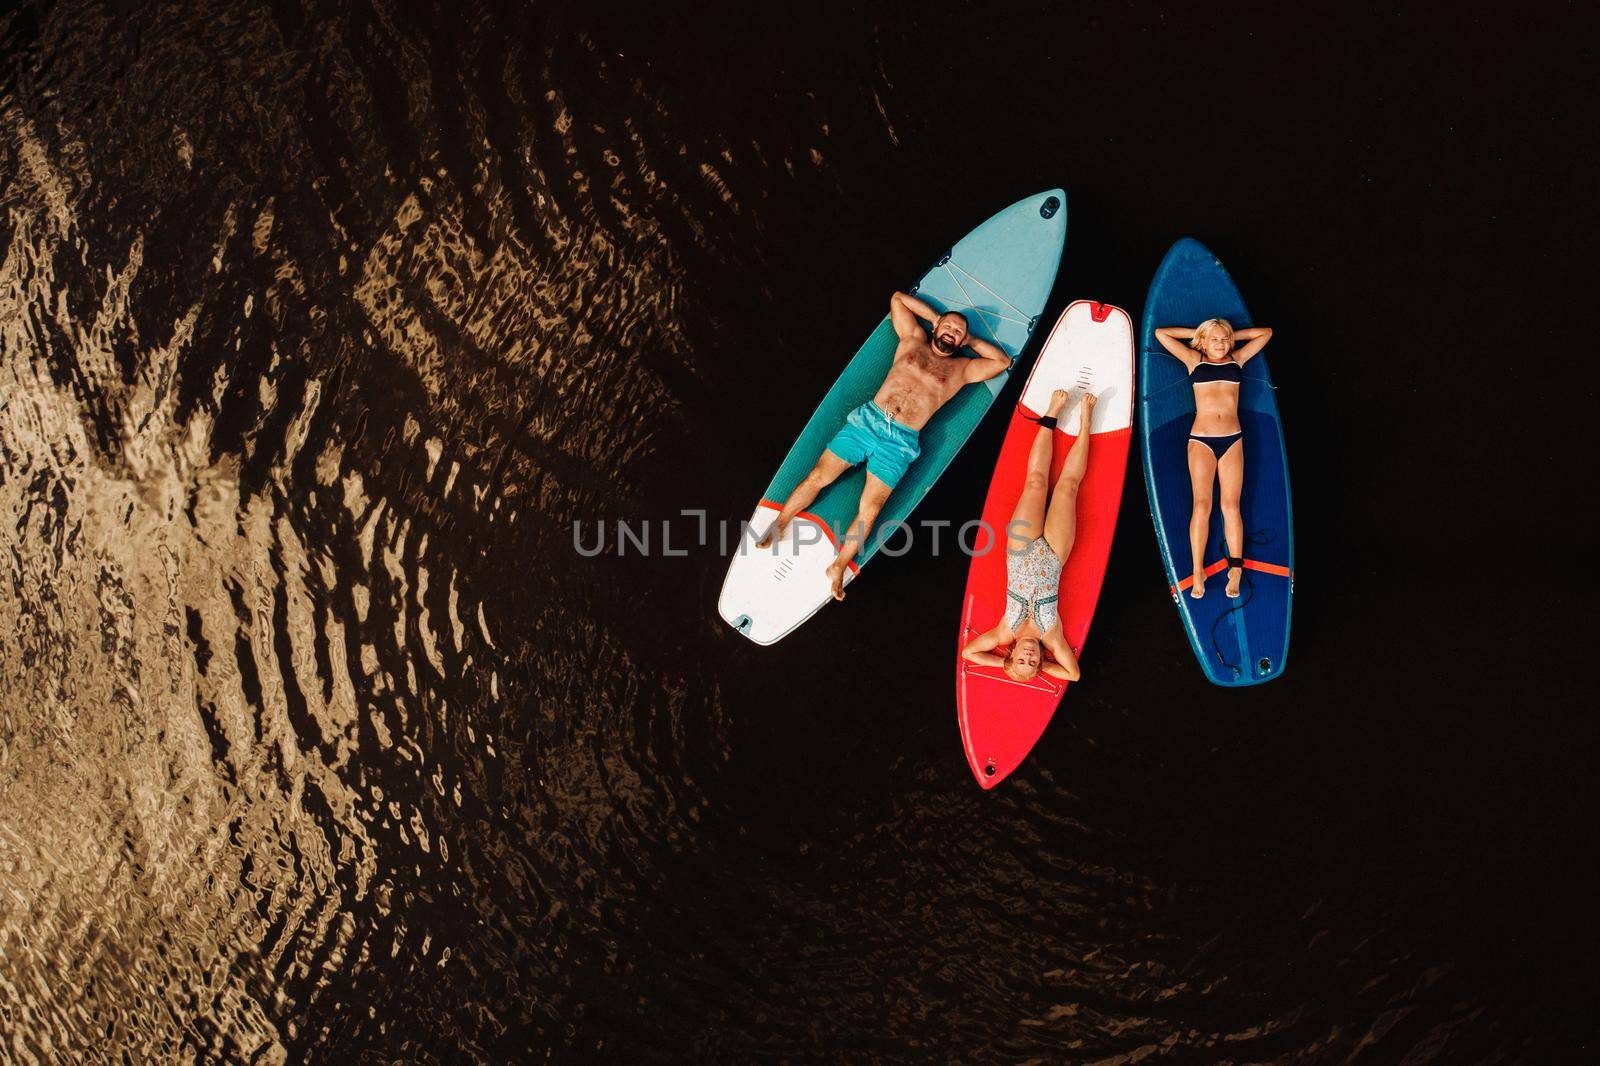 Family spend time together relaxing on sup boards on the lake.